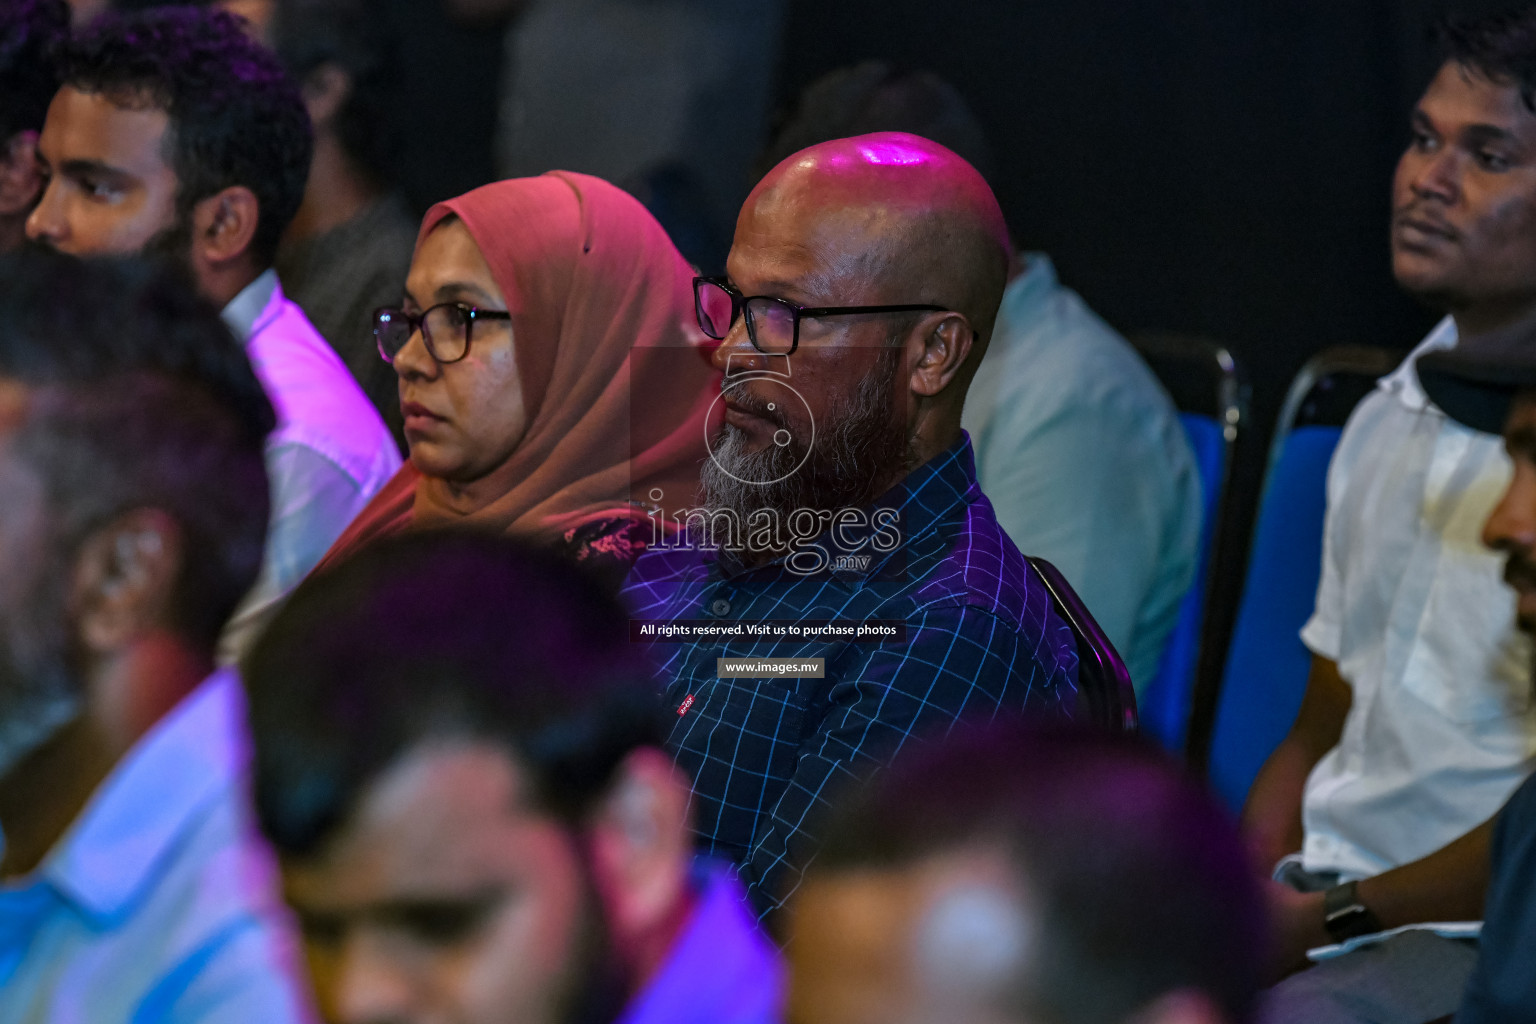 Club Maldives Cup 2022 Draw Ceremony on 23rd Sep 2022, held in Male', Maldives Photos: Nausham Waheed / Images.mv